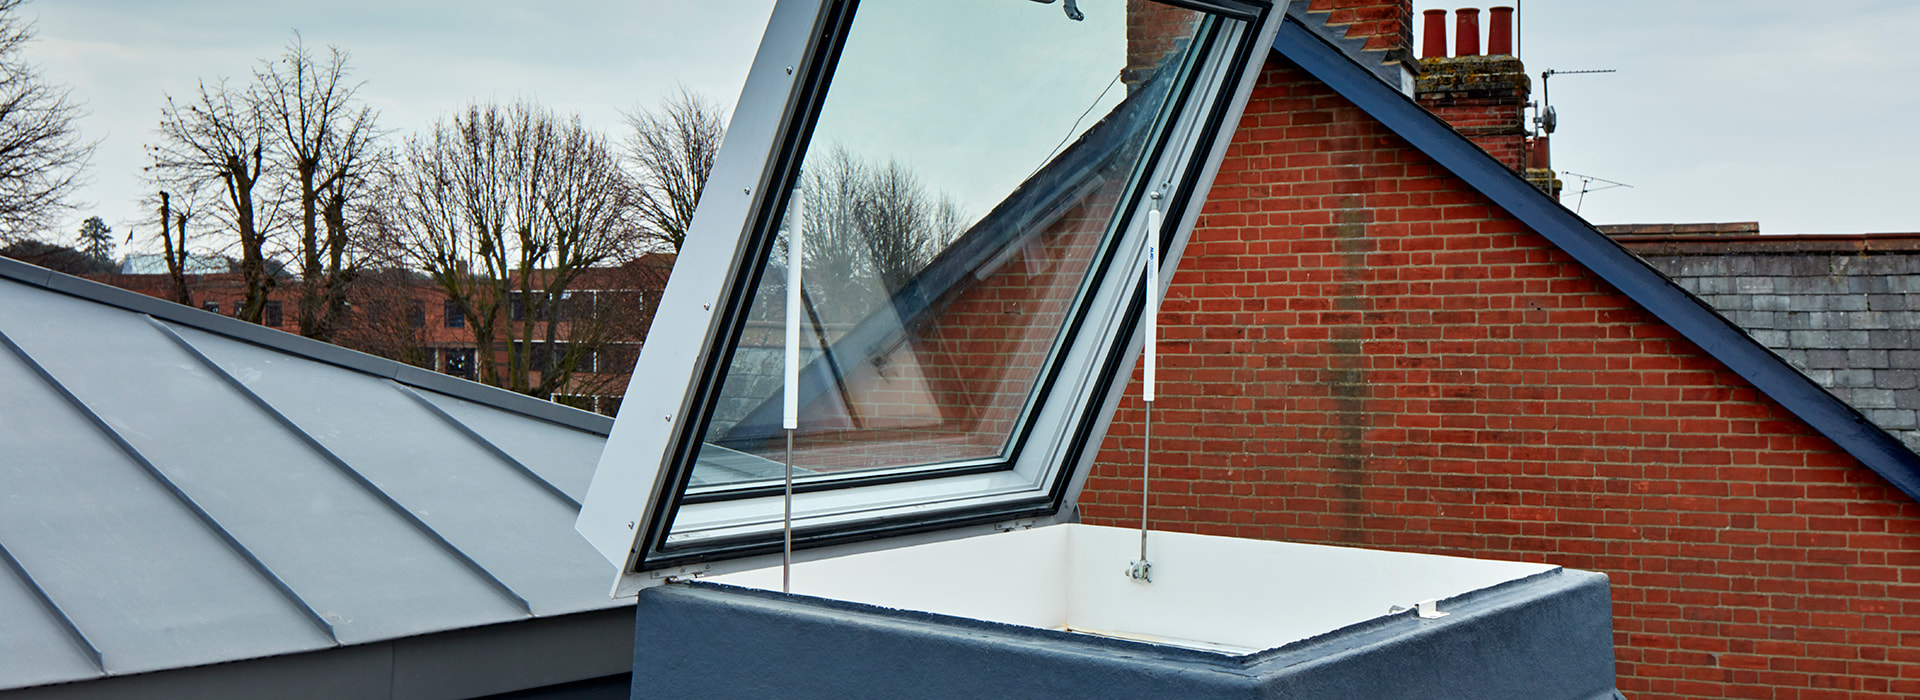 Glass roof access hatch